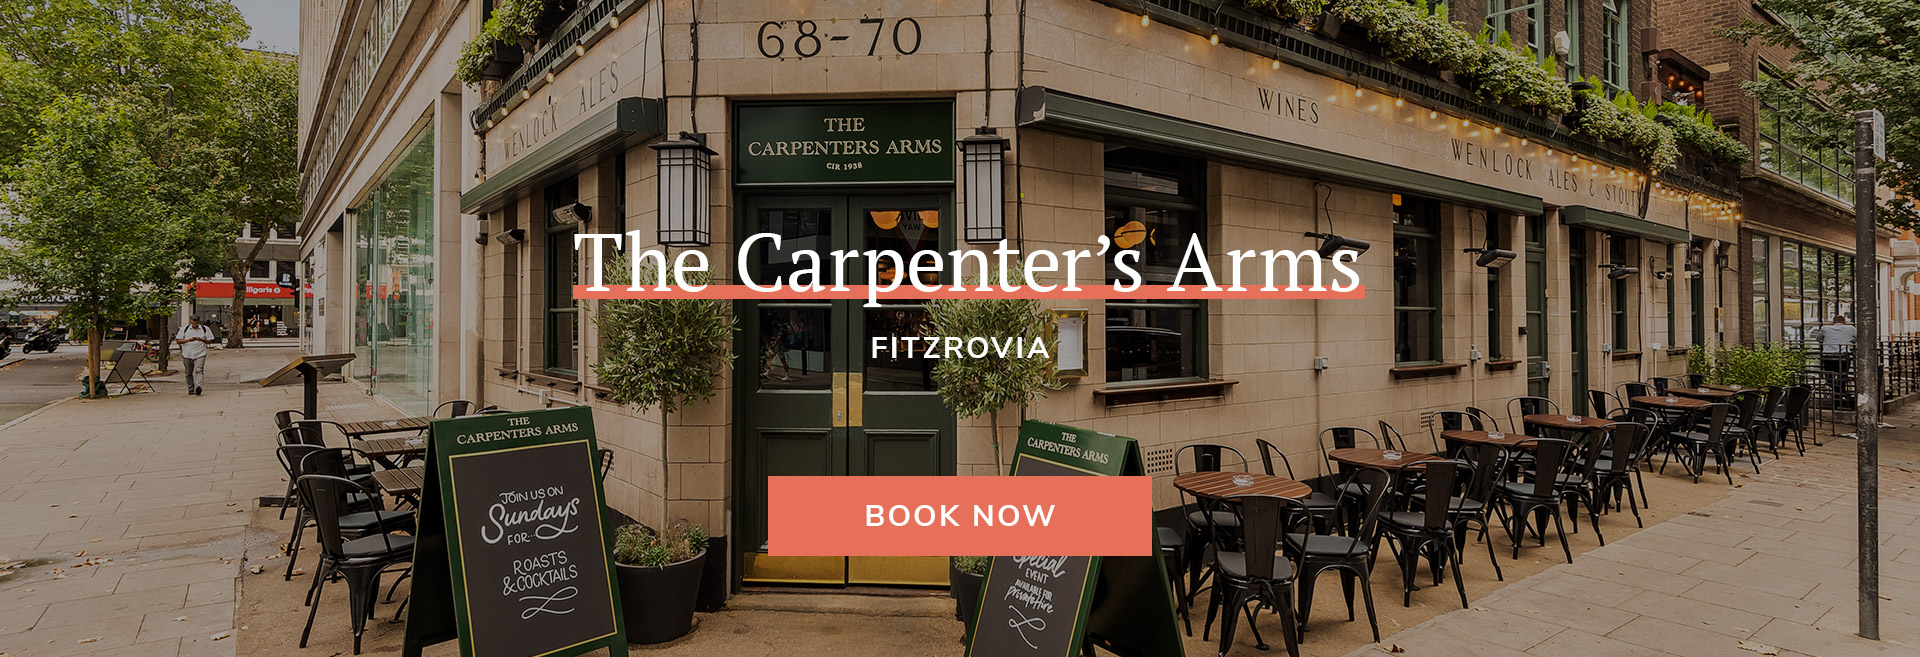 The Carpenter's Arms Banner 1